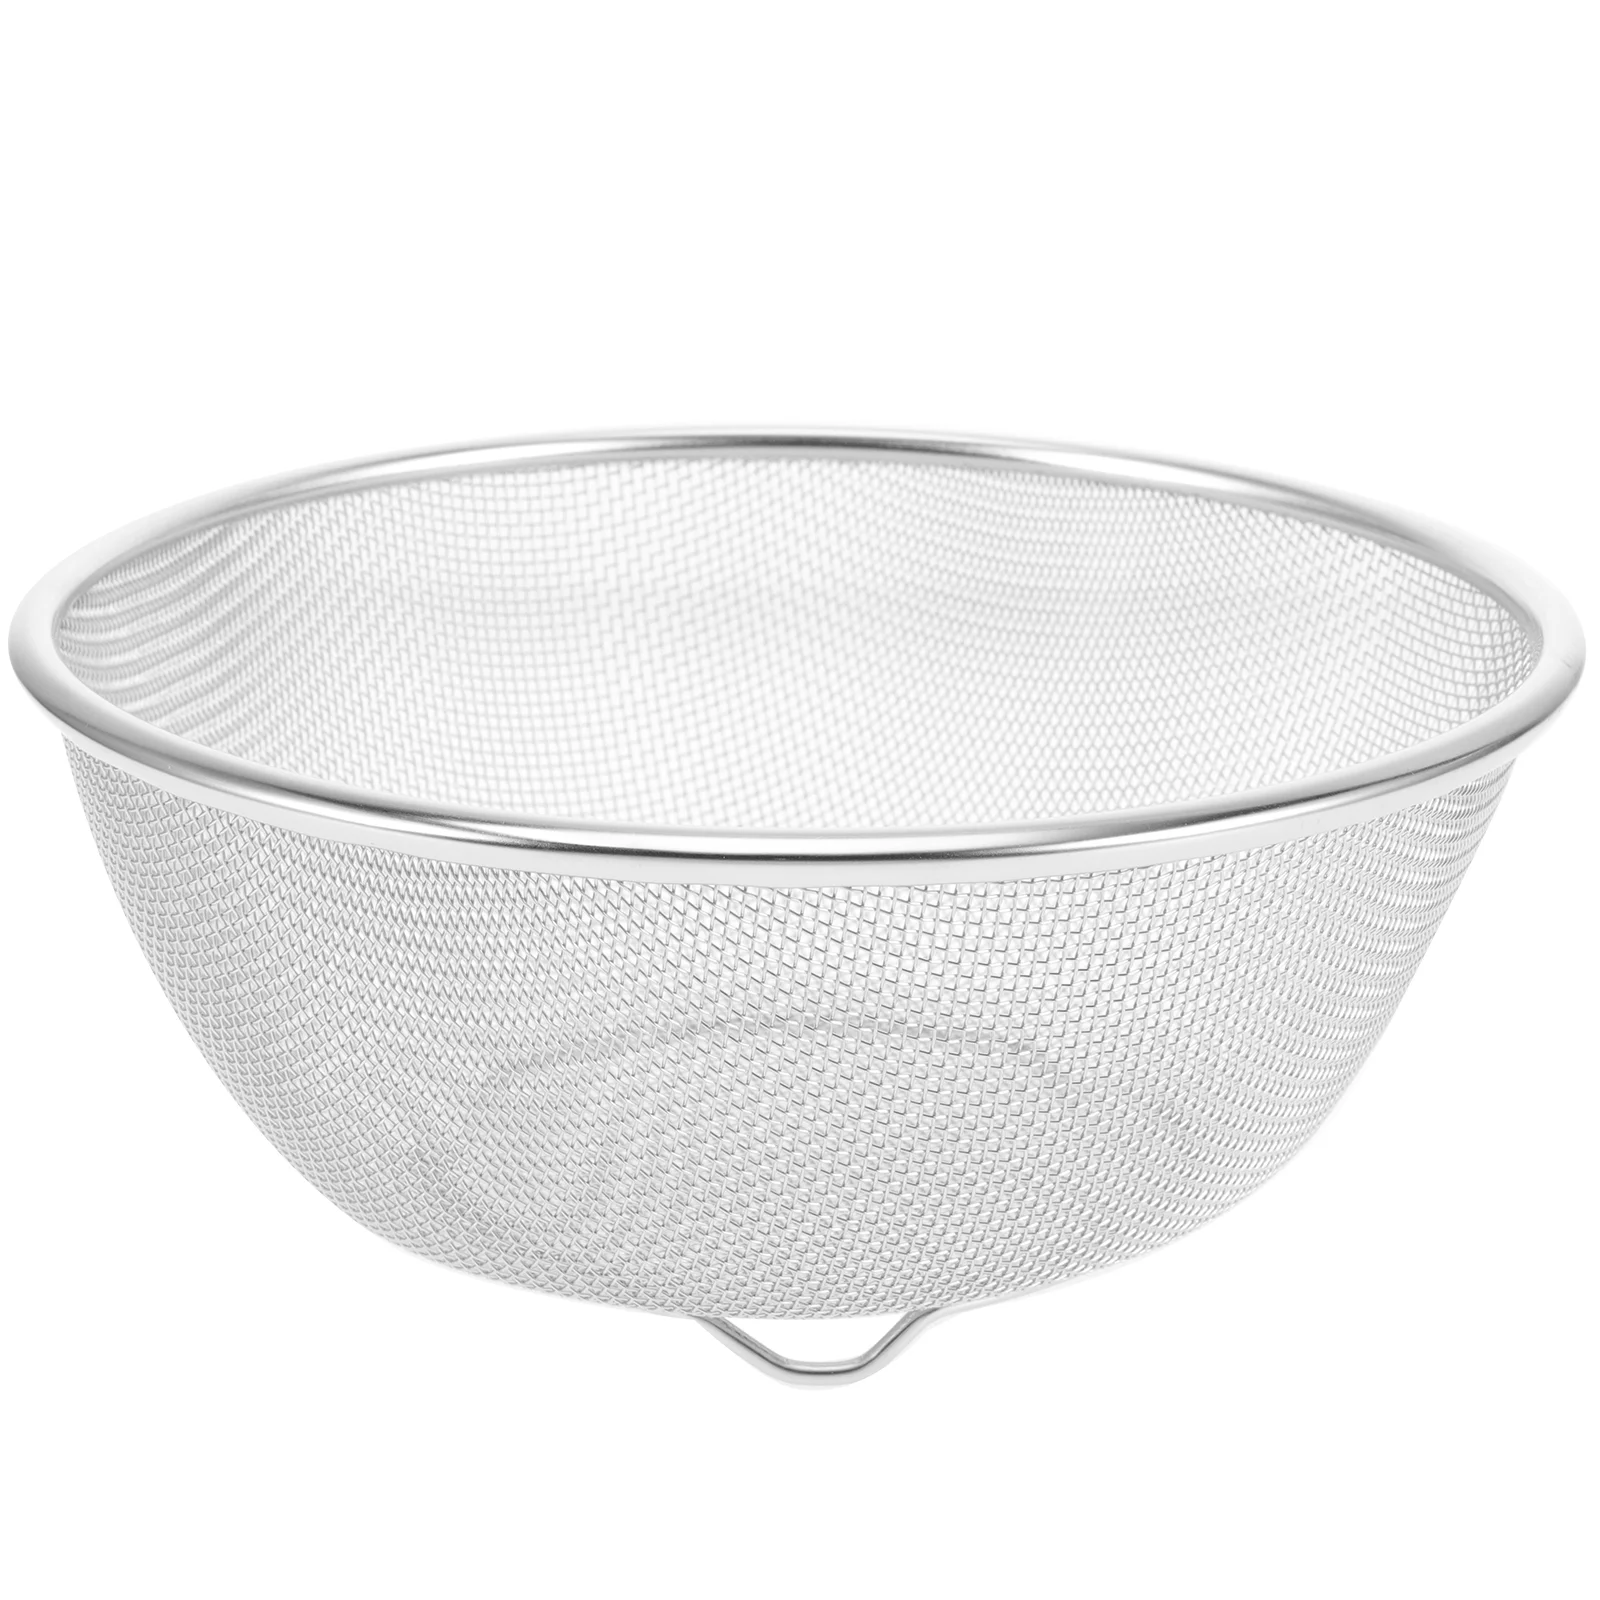 

Rice Drainer Strainer Filter Cleaner Colander Fine Mesh Stainless Steel Strainers Washing Bowl